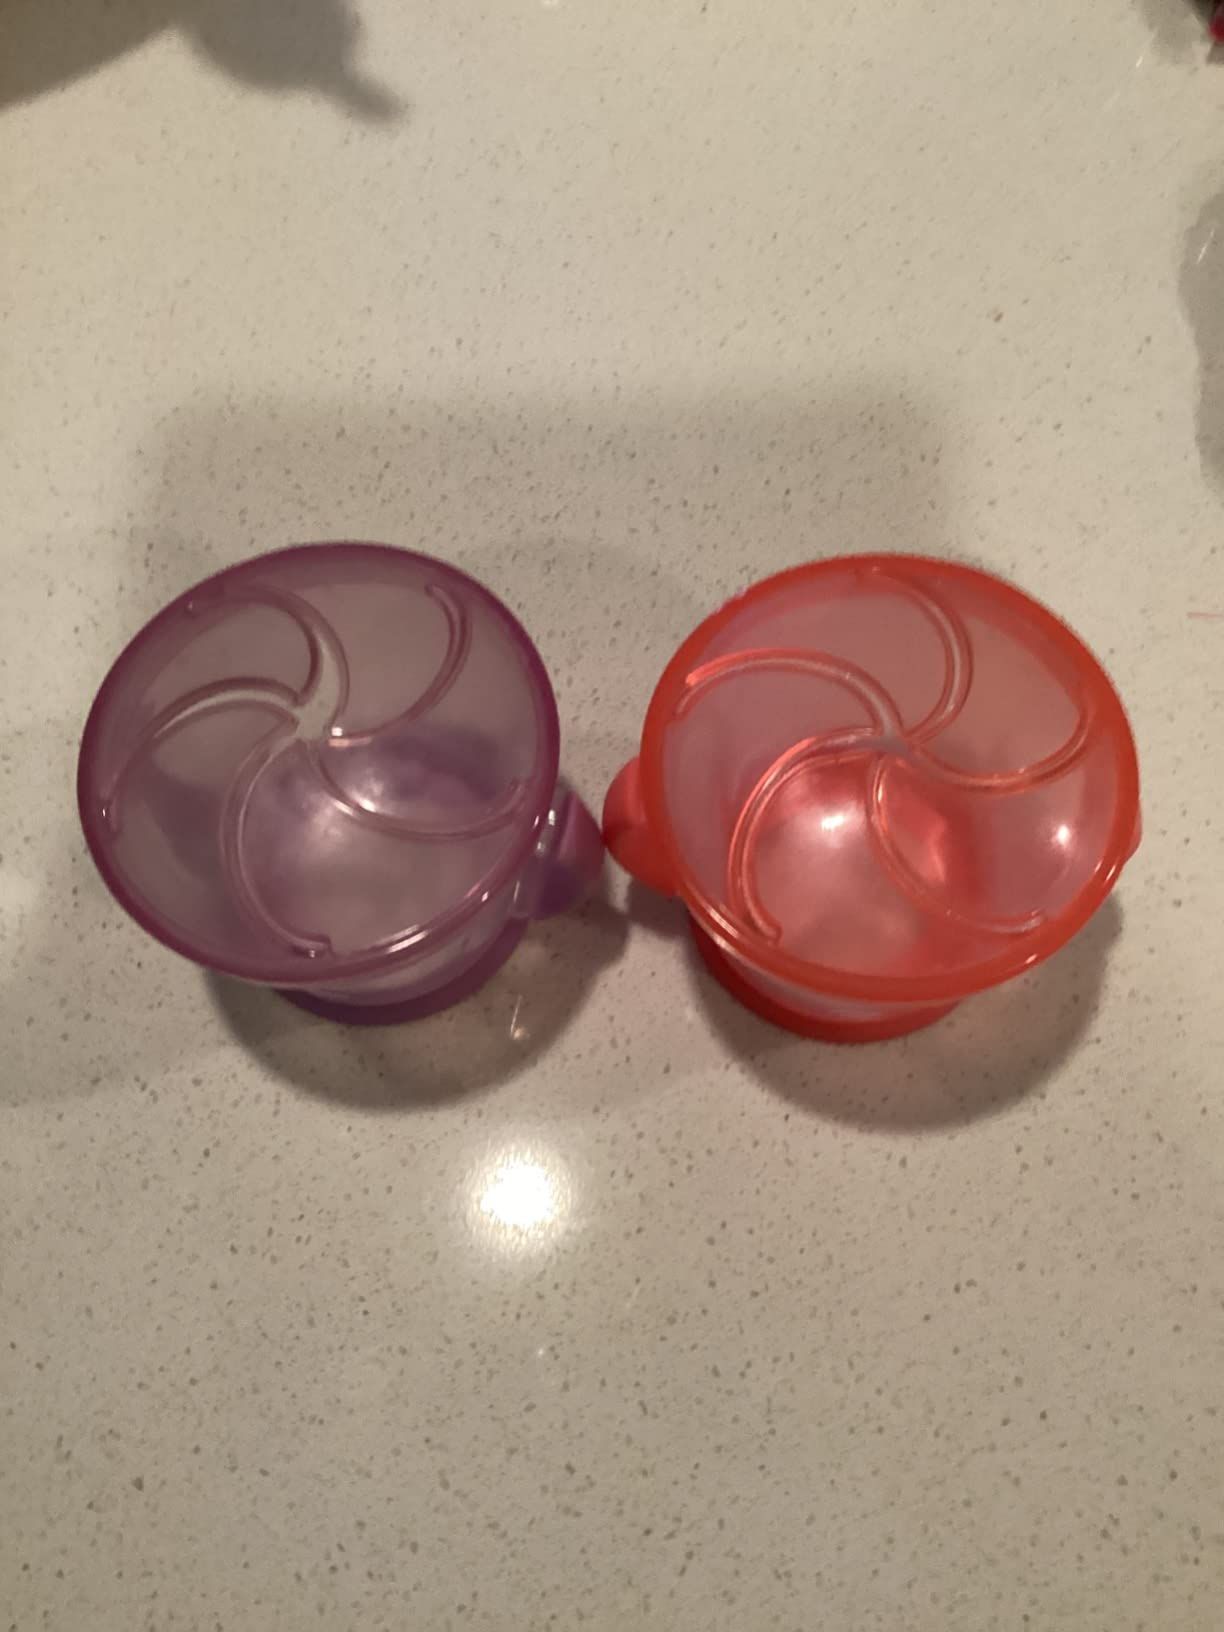 Munchkin® Snack Catcher® Toddler Snack Cups, 2 Pack, Pink/Purple | Amazon (US)